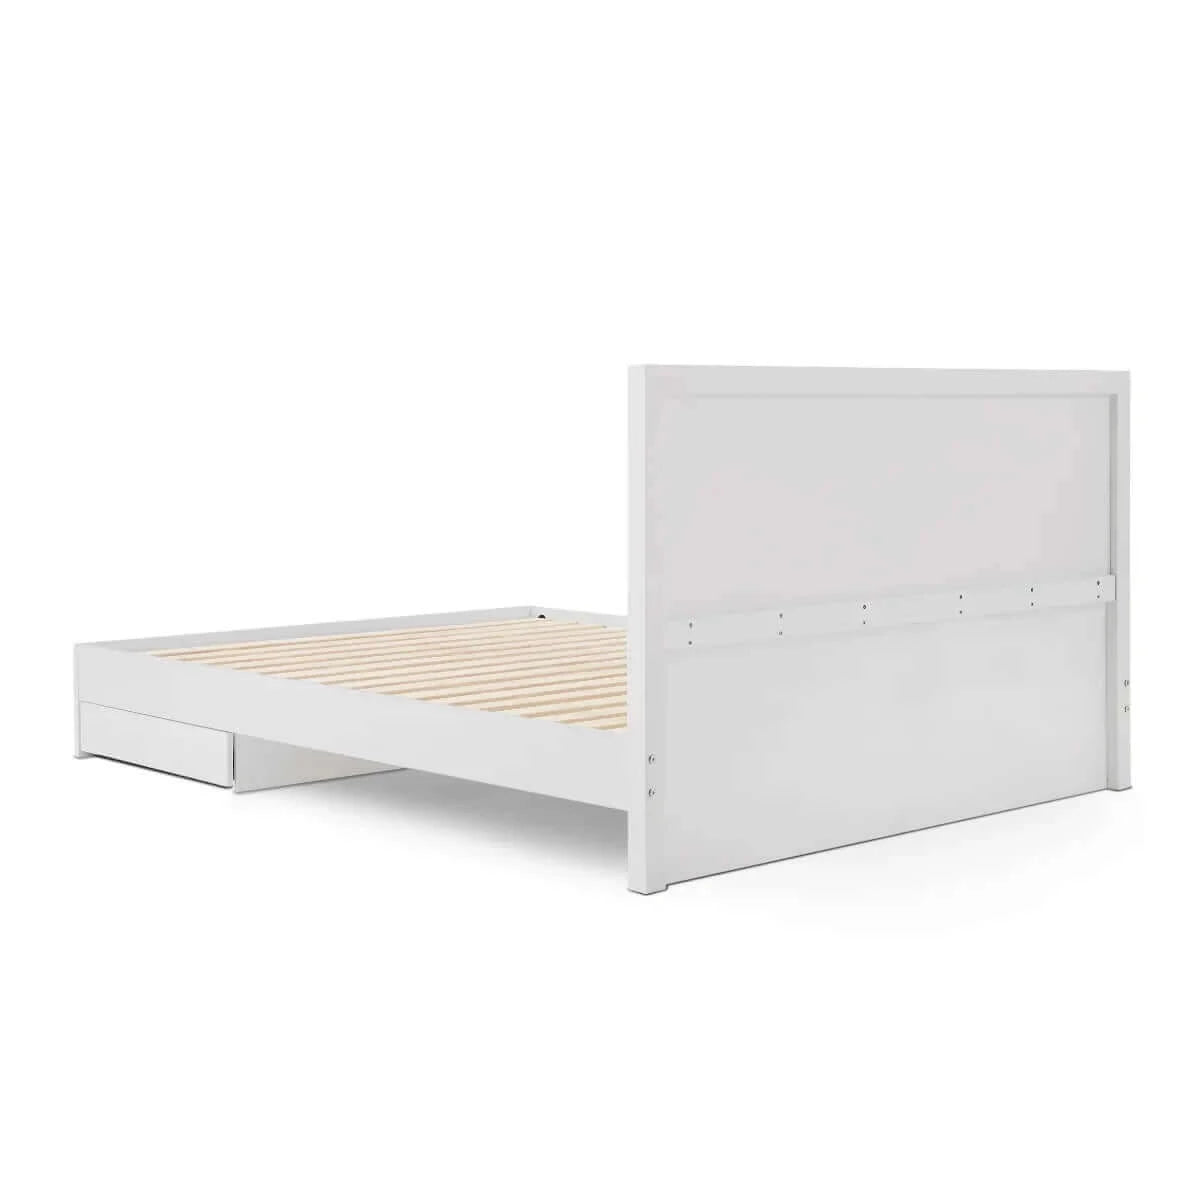 Buy tracey column bed frame with storage - king - upinteriors-Upinteriors